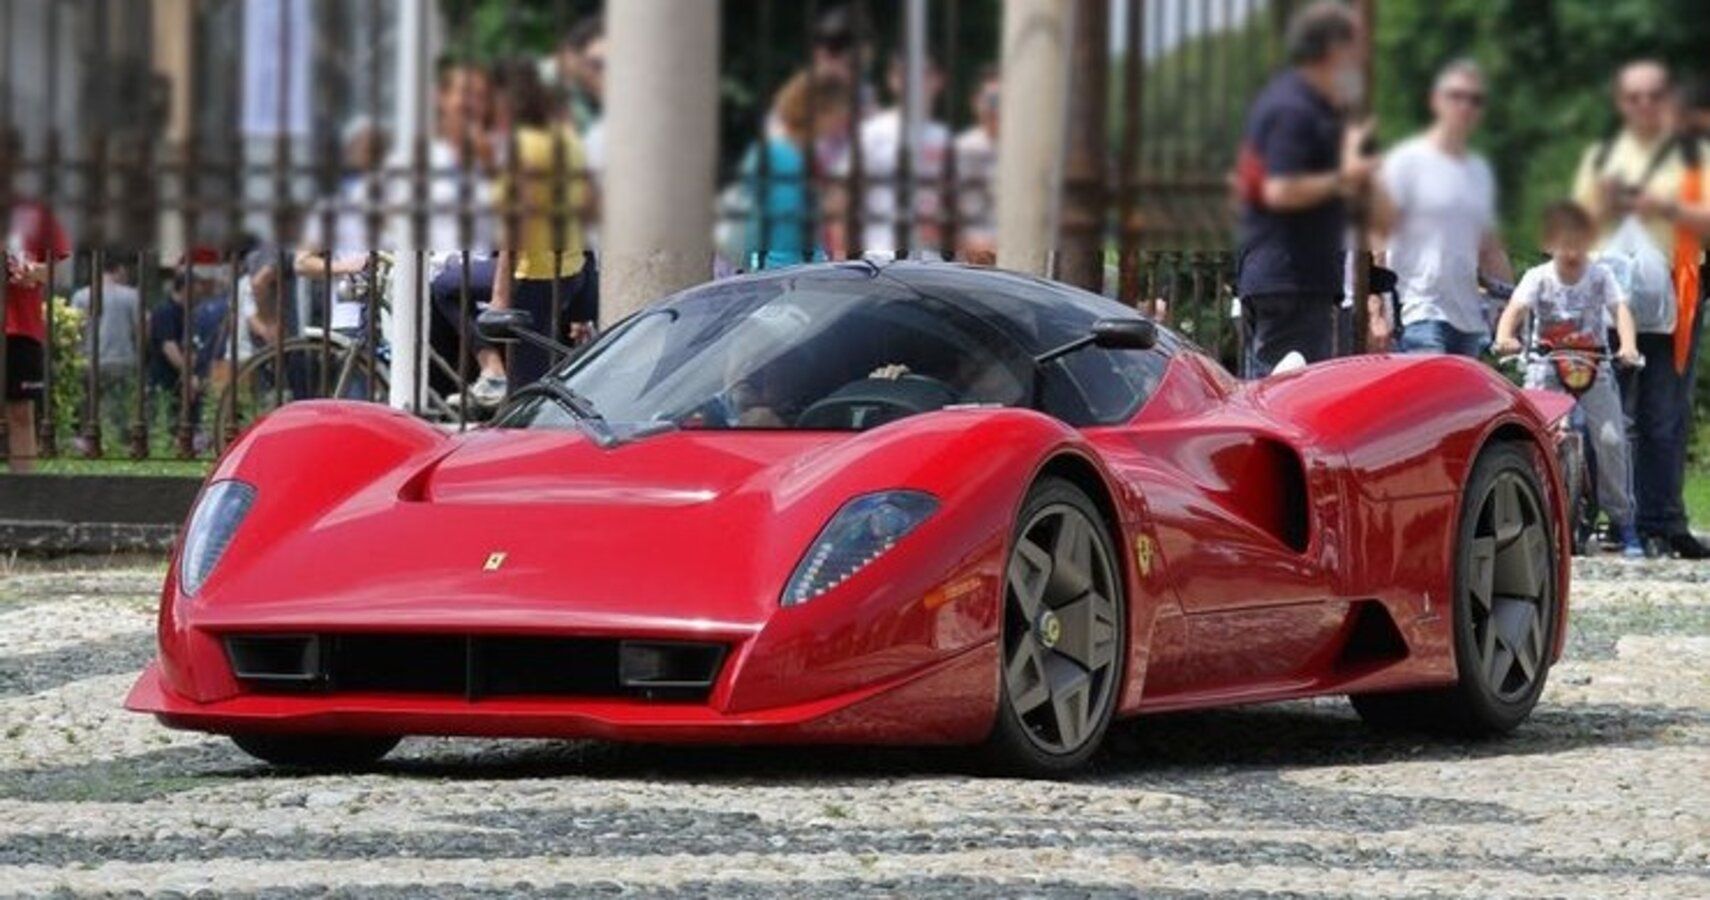 Ferrari P4/5 is the rarest sports car of all time